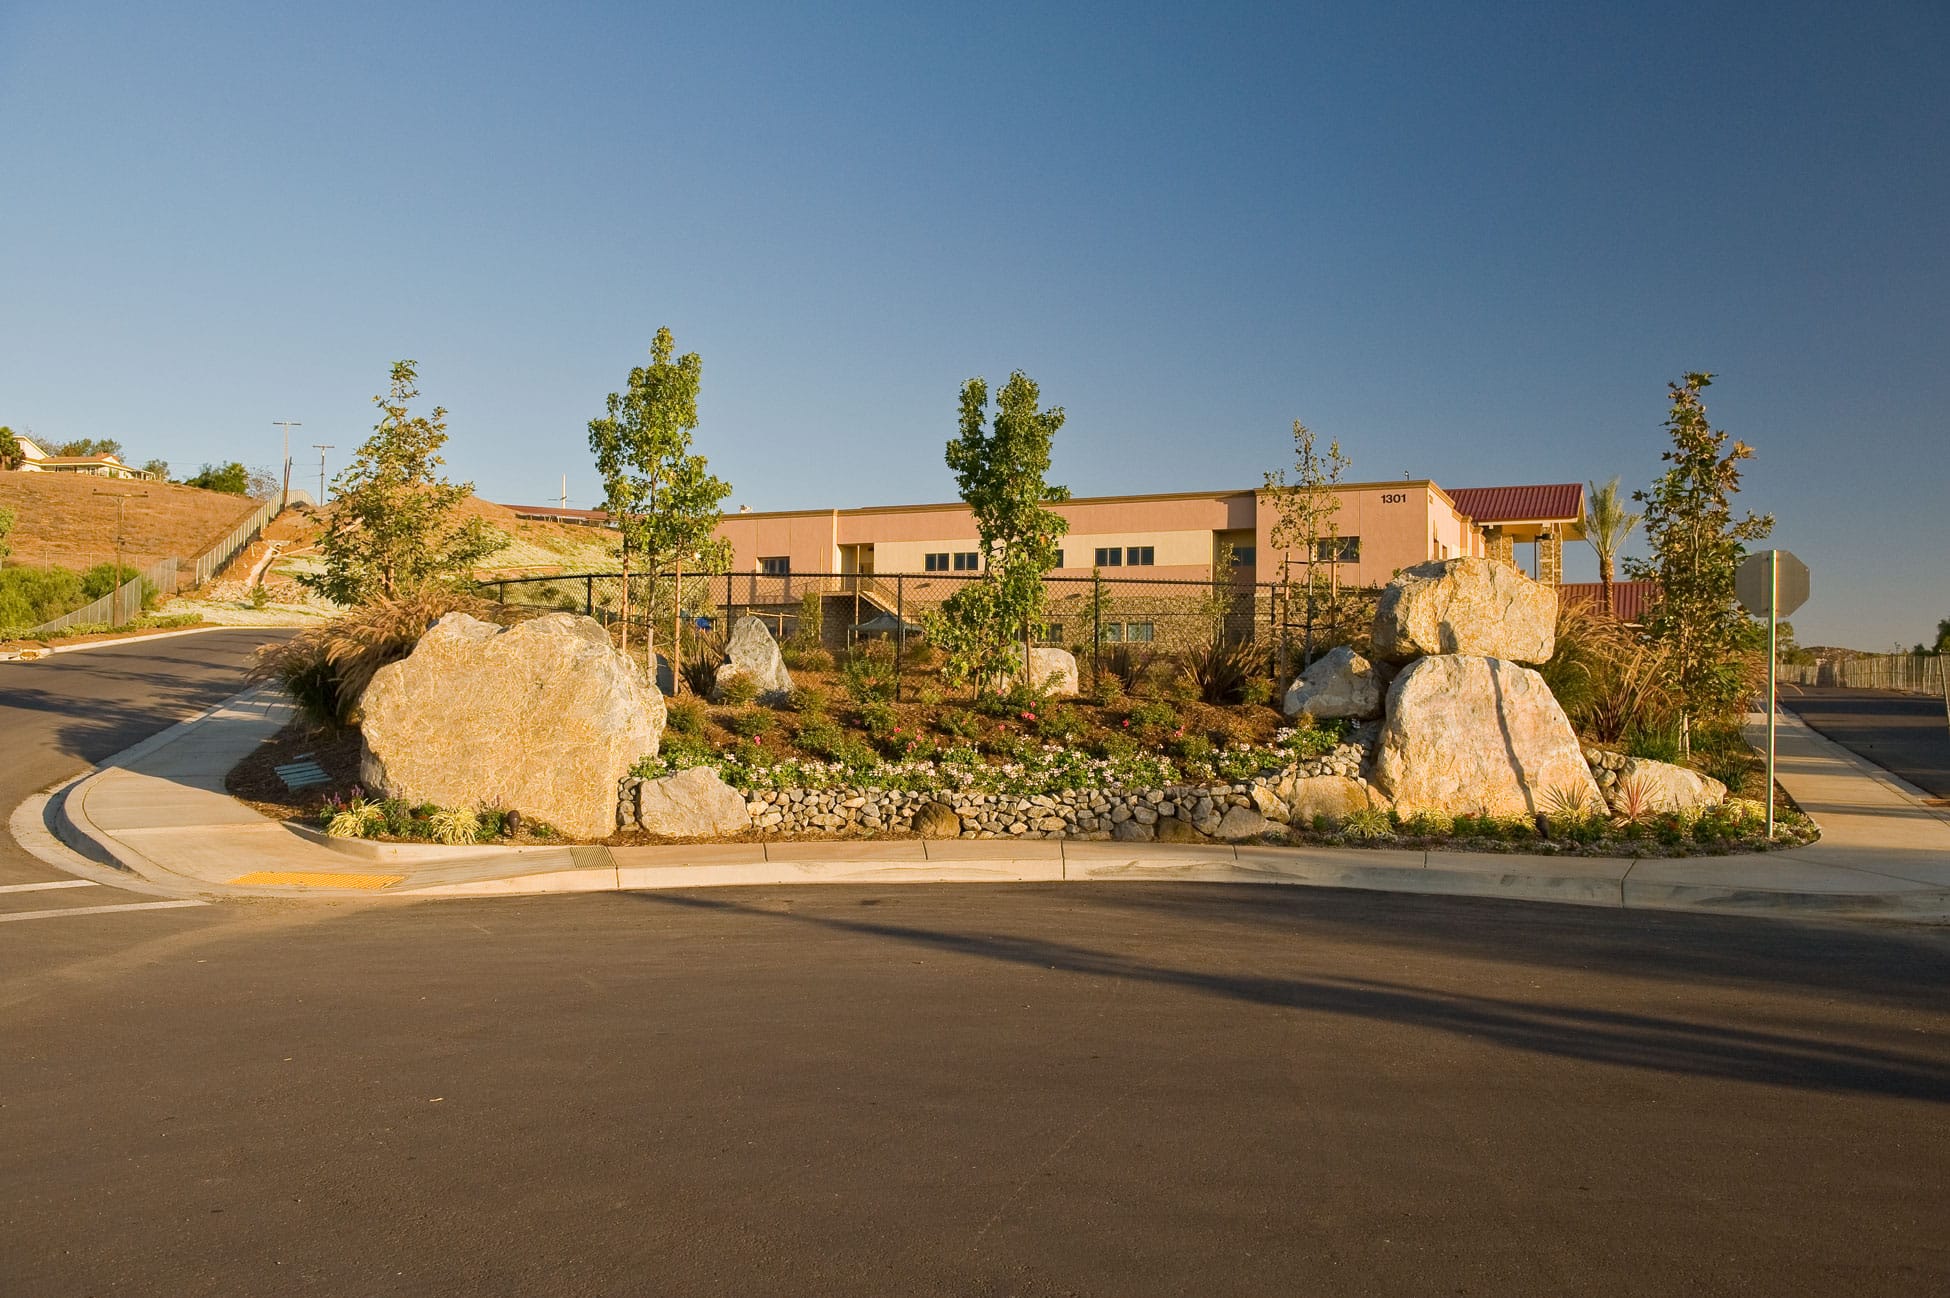 Kimley-Horn provided land development, surface water, and utility design services for the development of the Escondido Seventh Day Adventist Church and Academy.